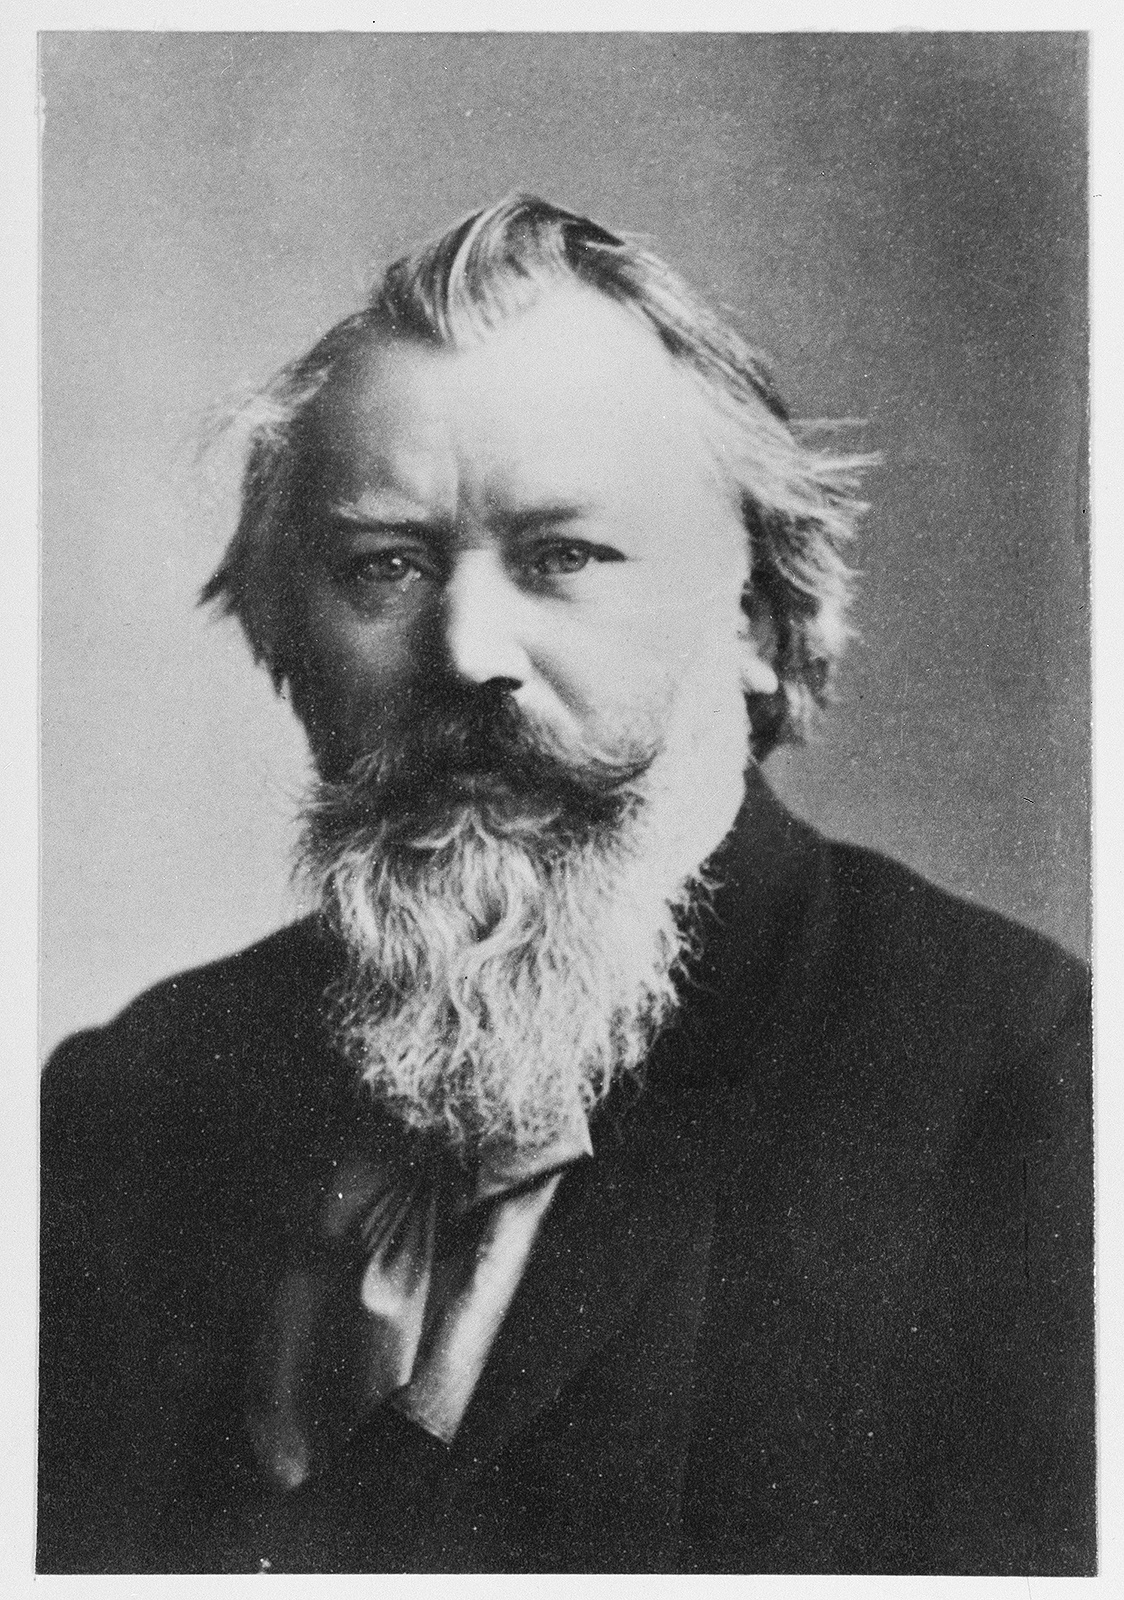 Portrait photo of Johannes Brahms in black and white.